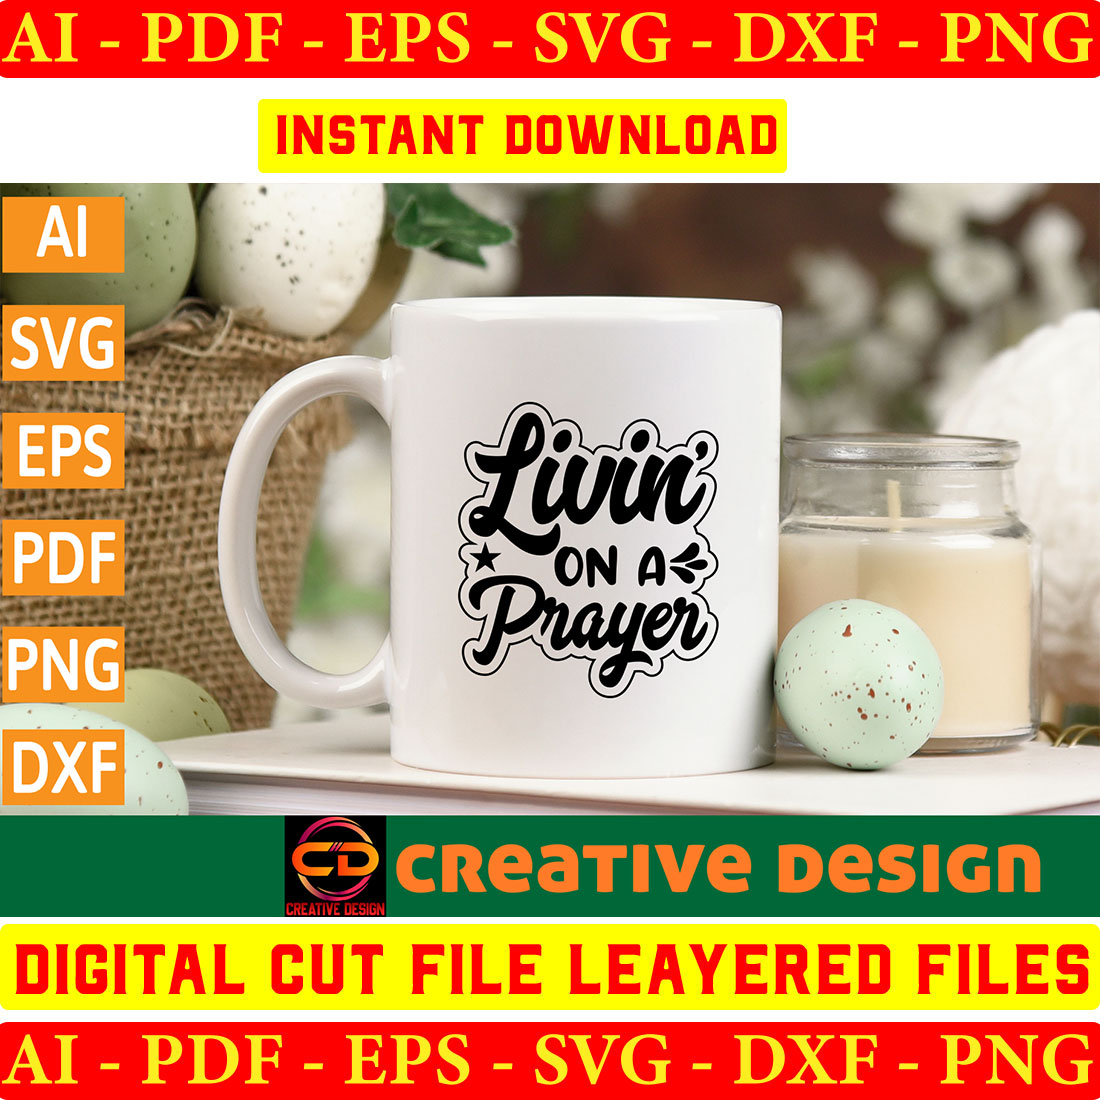 Coffee Cup Instant Digital Download Svg, Png, Dxf, and Eps Files